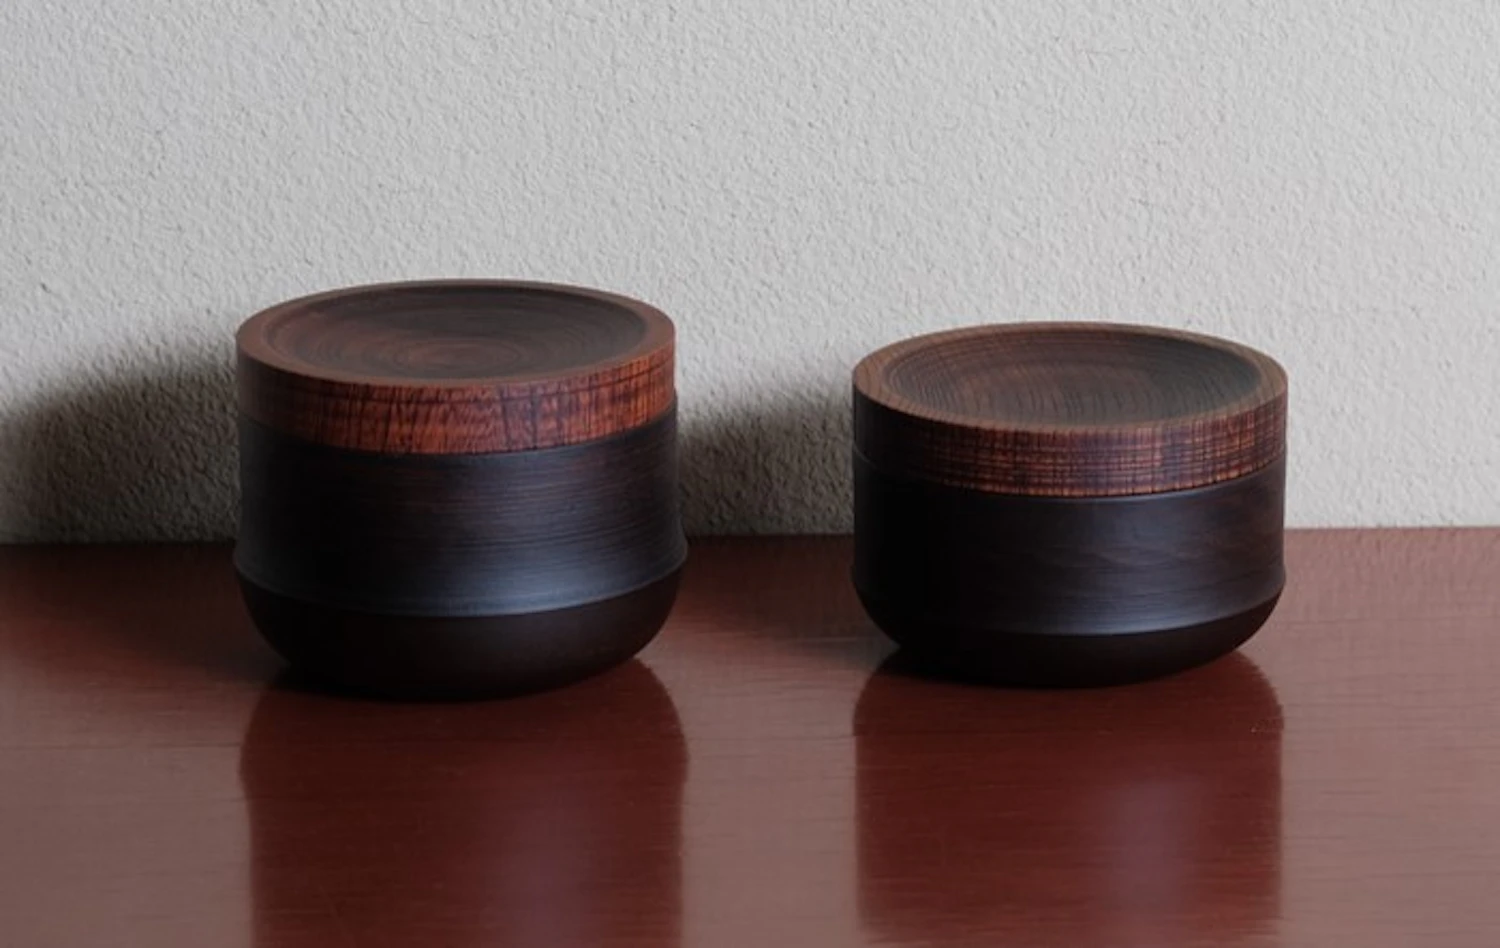 Lacquerware made from cacao husks